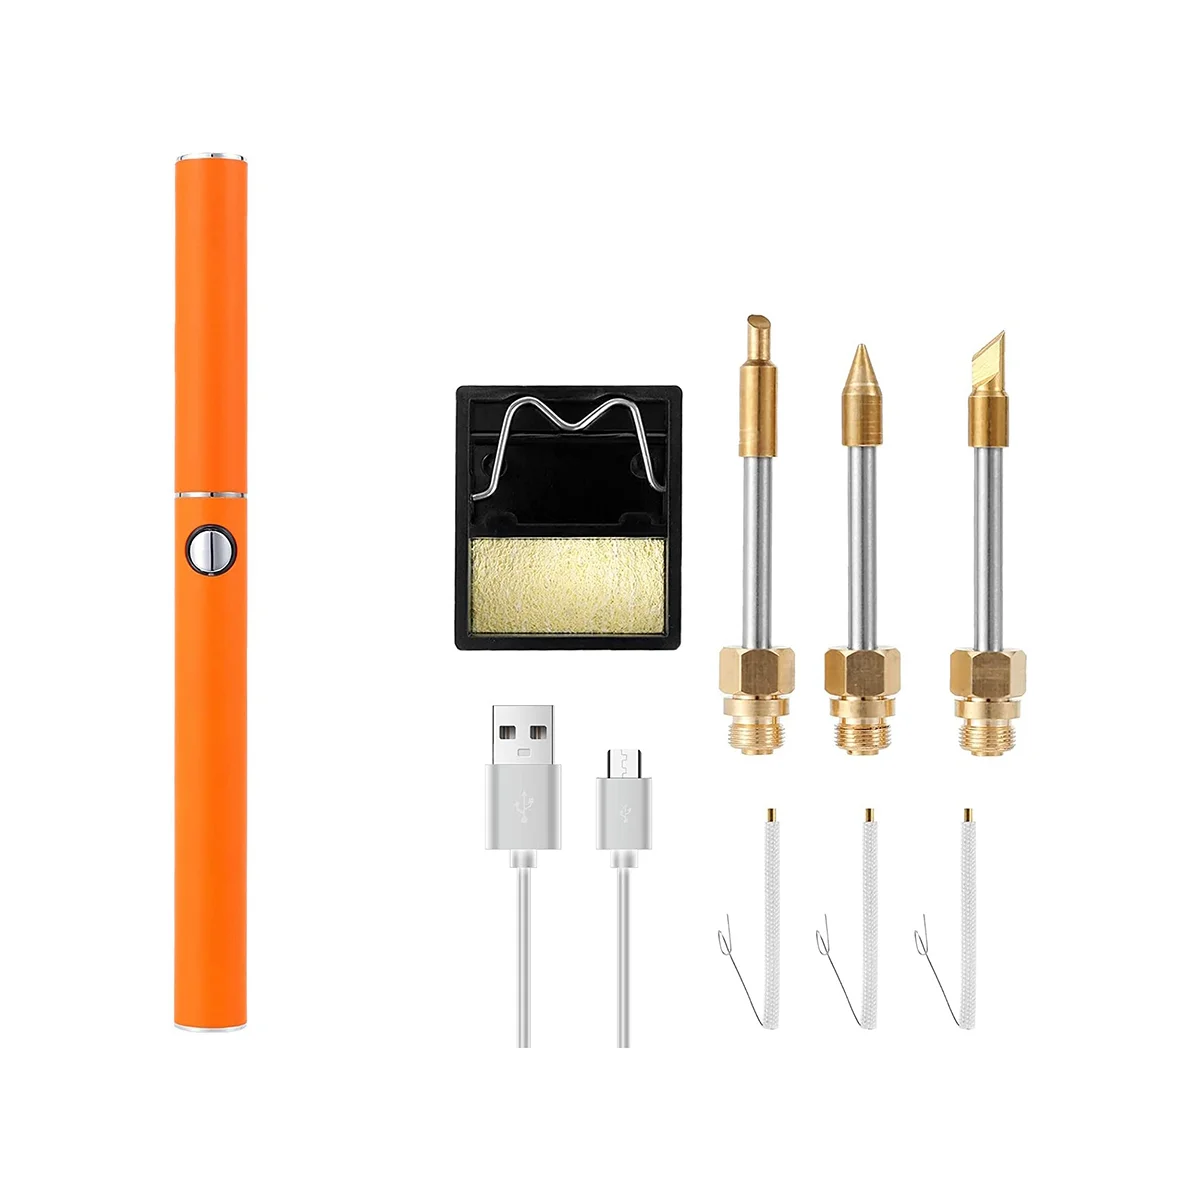 

Soldering Iron Kit, Cordless Rapid Heating Electric Soldering Kit Iron Tips,for Circuit Board Computer Electronic Repair